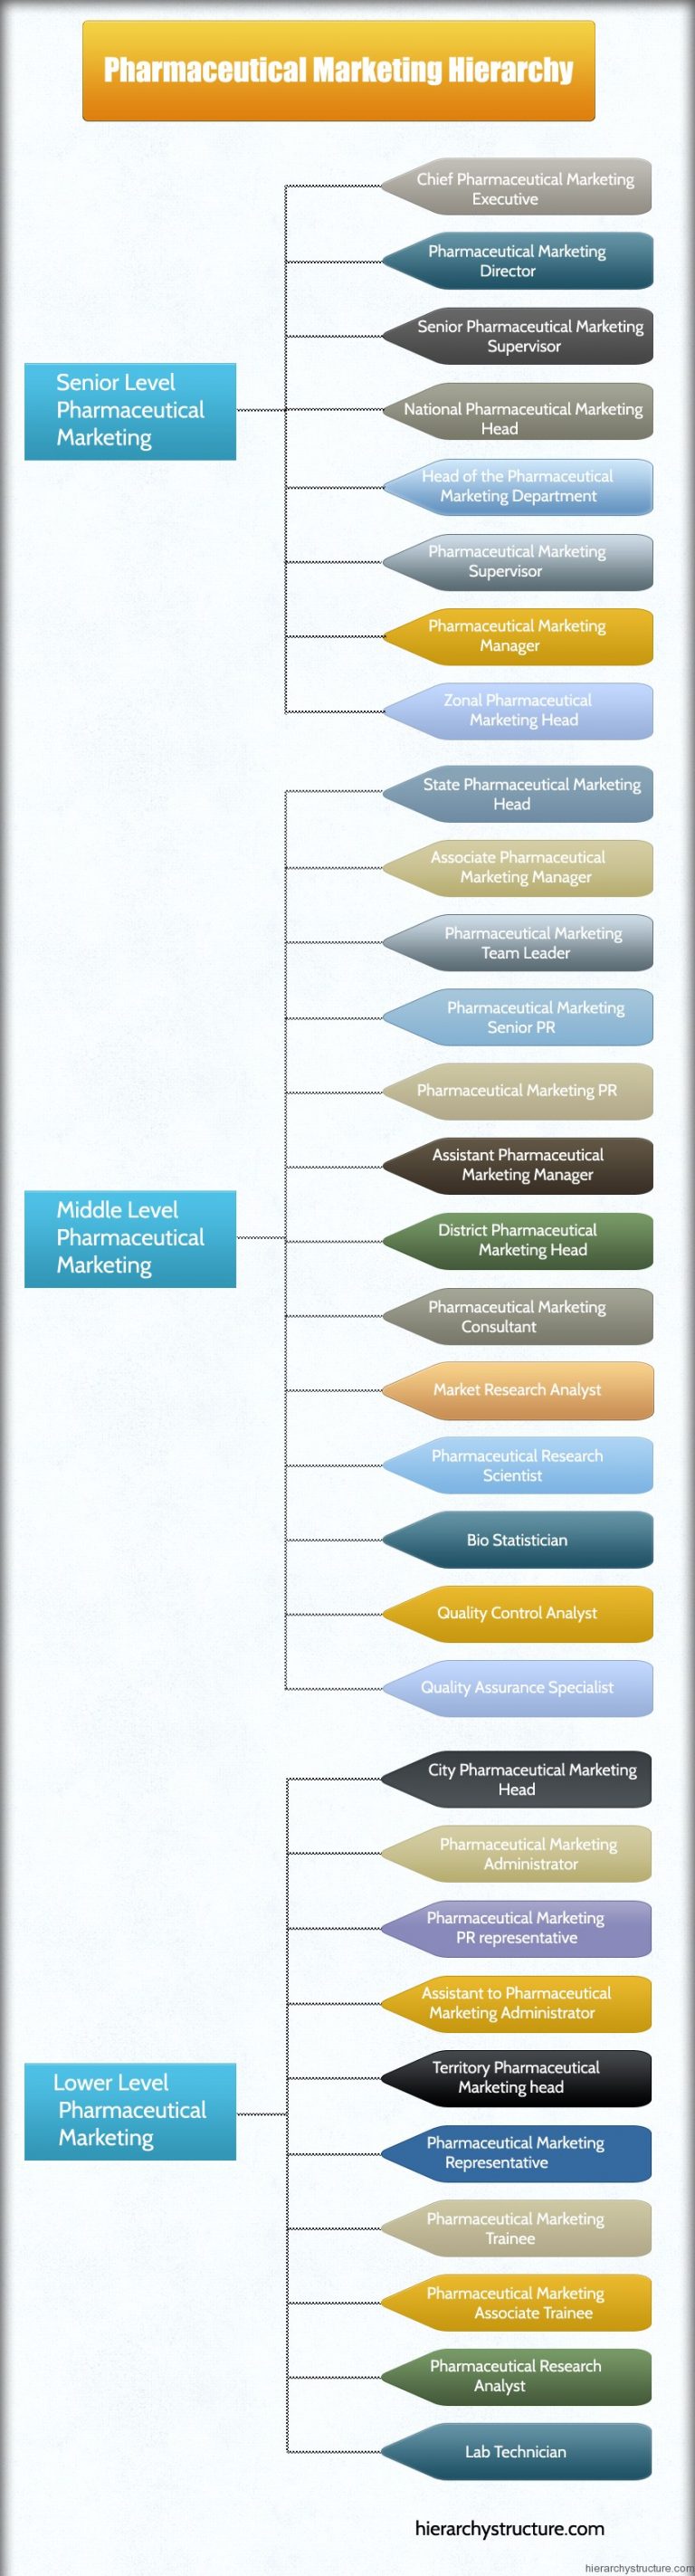 Pharmaceutical Marketing Hierarchy